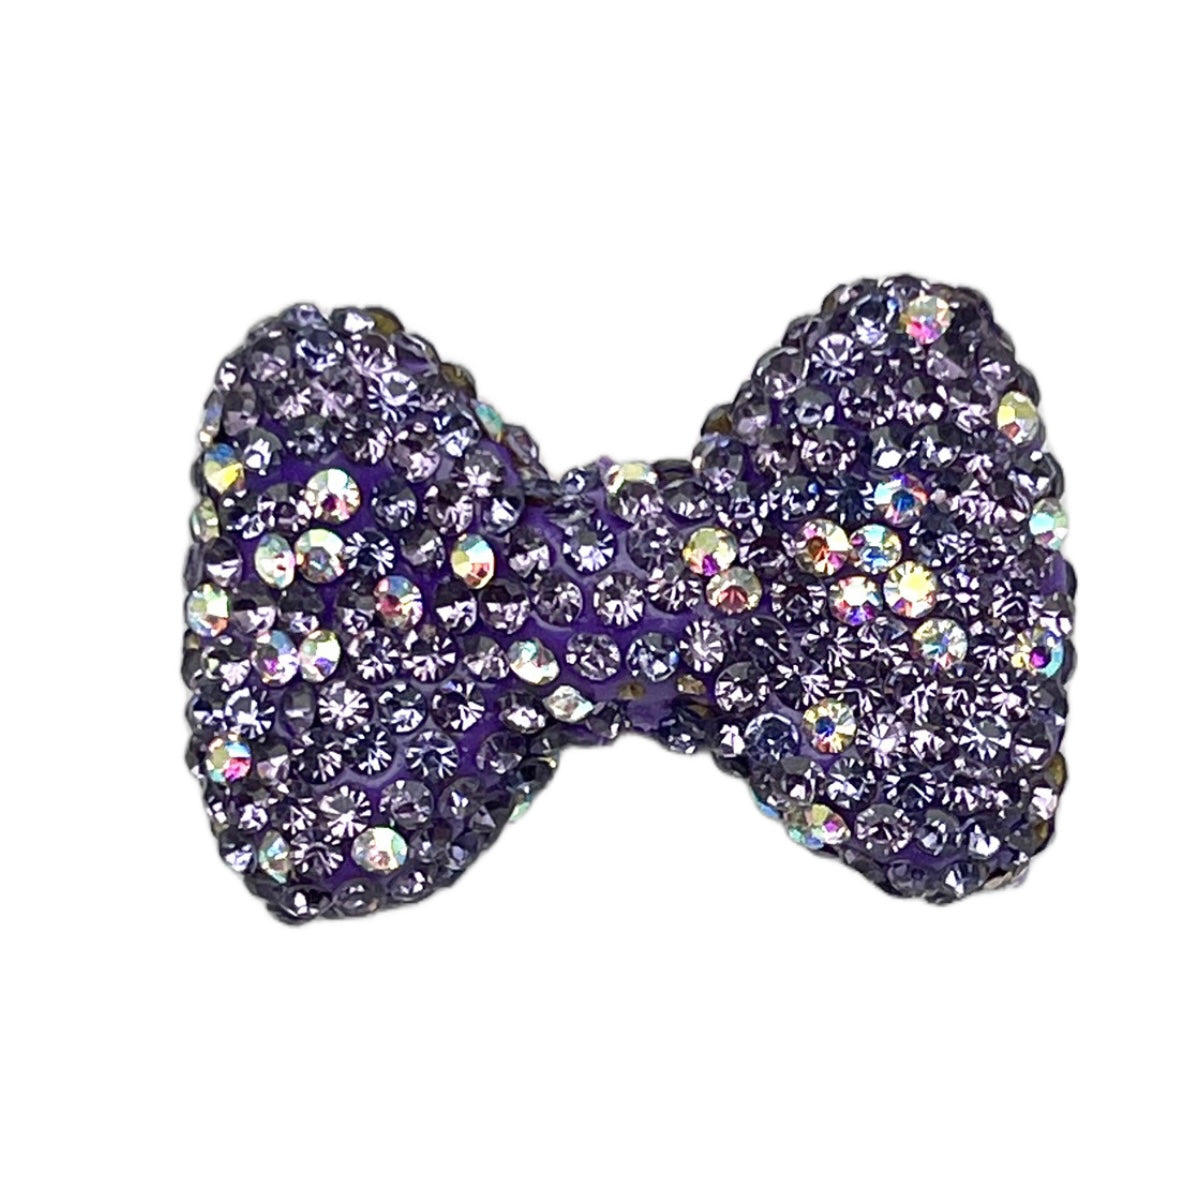 Battle of the Bows Acrylic Rhinestone Beads | Luxury beads | Hand Placed Beads | Bow Beads | Colorful Beads